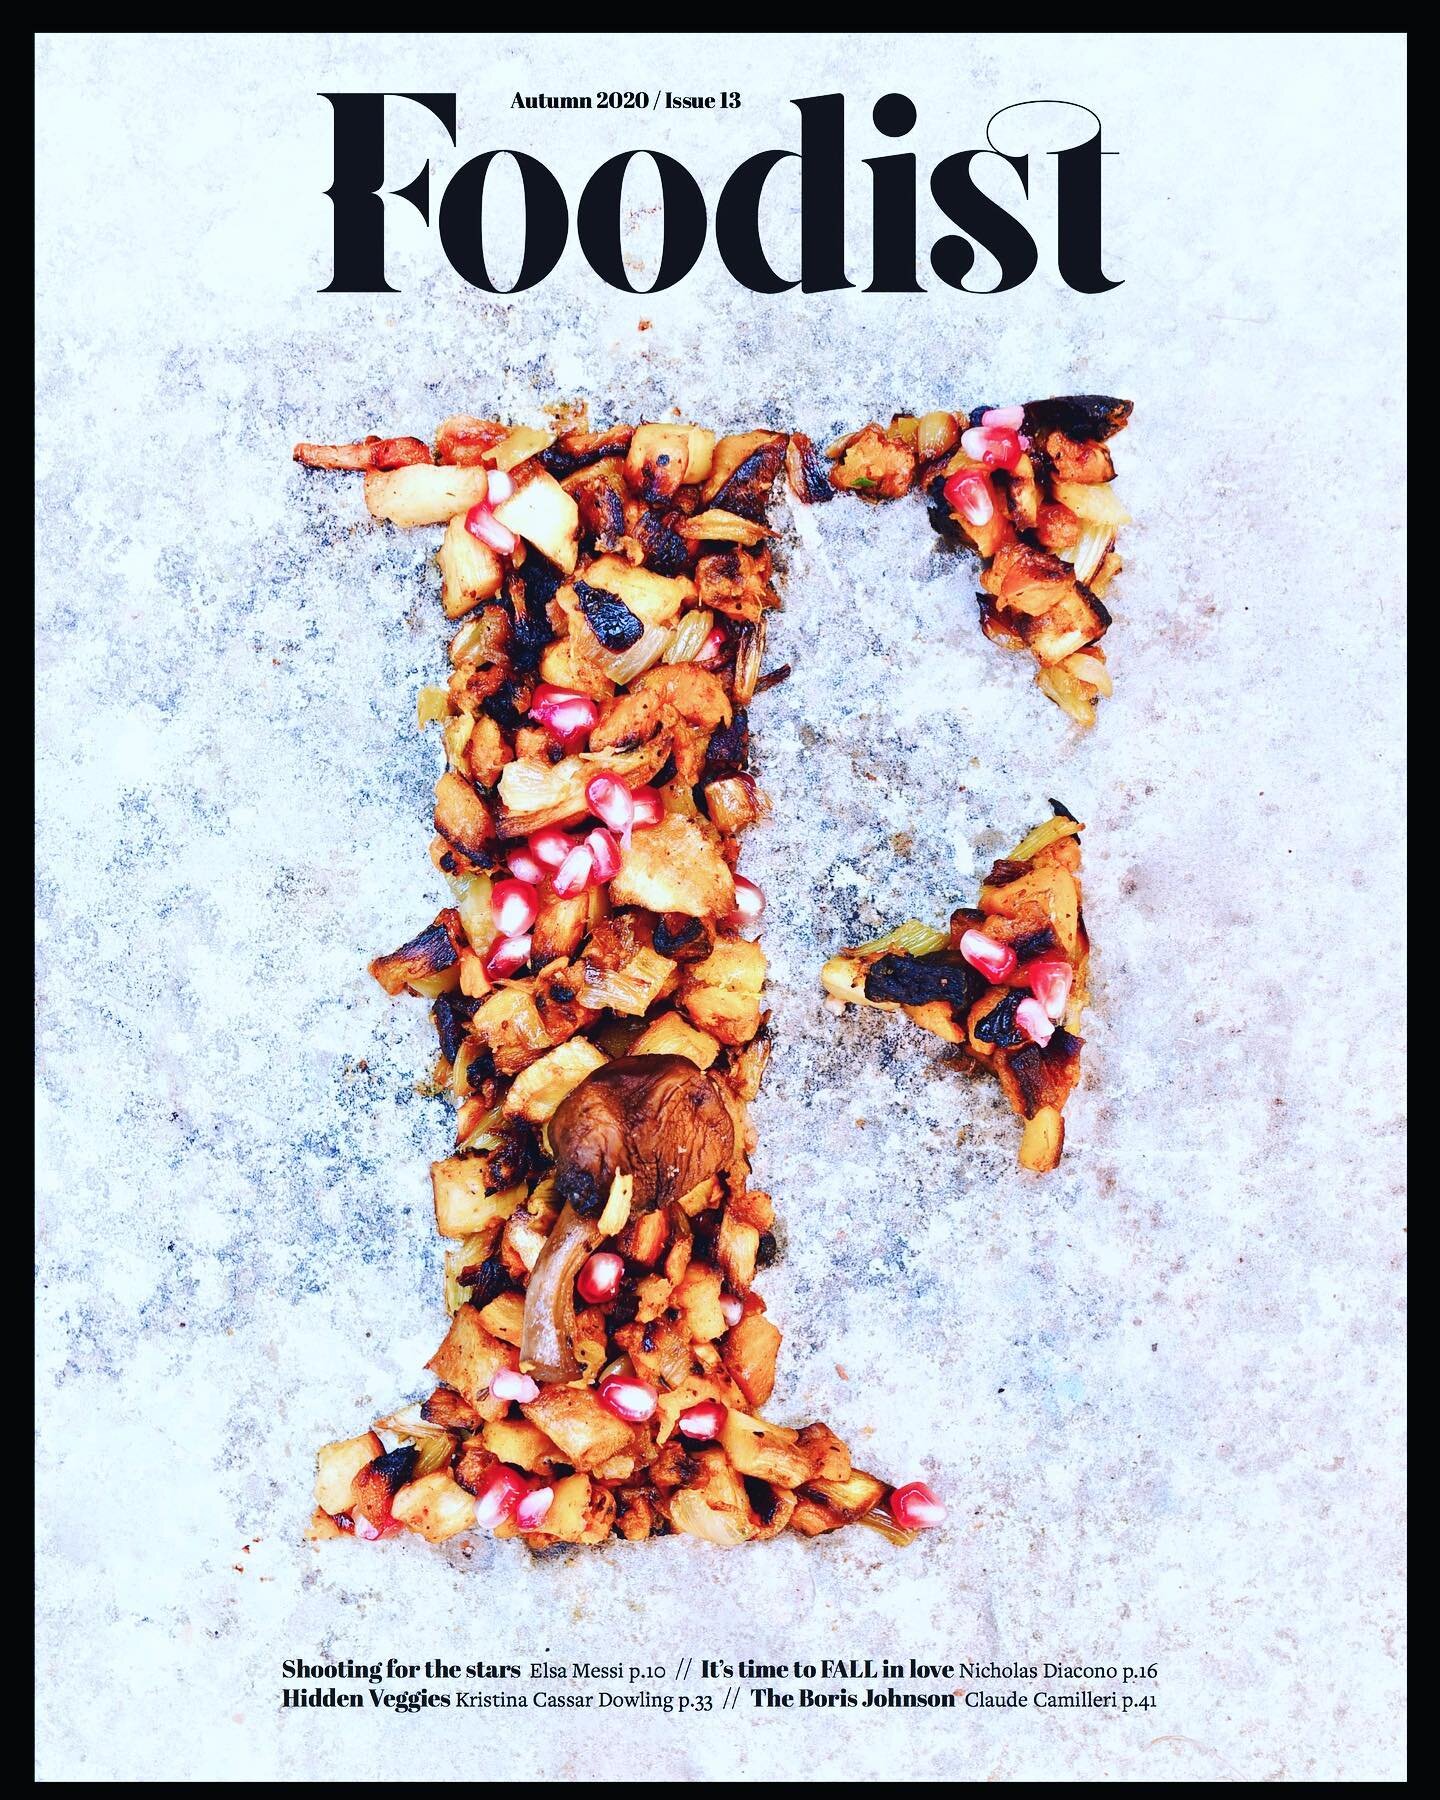 .
Autumn edition is up and loaded. Be the first to read the online version now! 🍂 
.
🖥📱 http://bit.ly/Foodist13
.
.
Packed with delicious recipes 🍽 📖 👨&zwj;🍳👩&zwj;🍳
.
#eardrinkread #foodist #parktowerssupermarkets